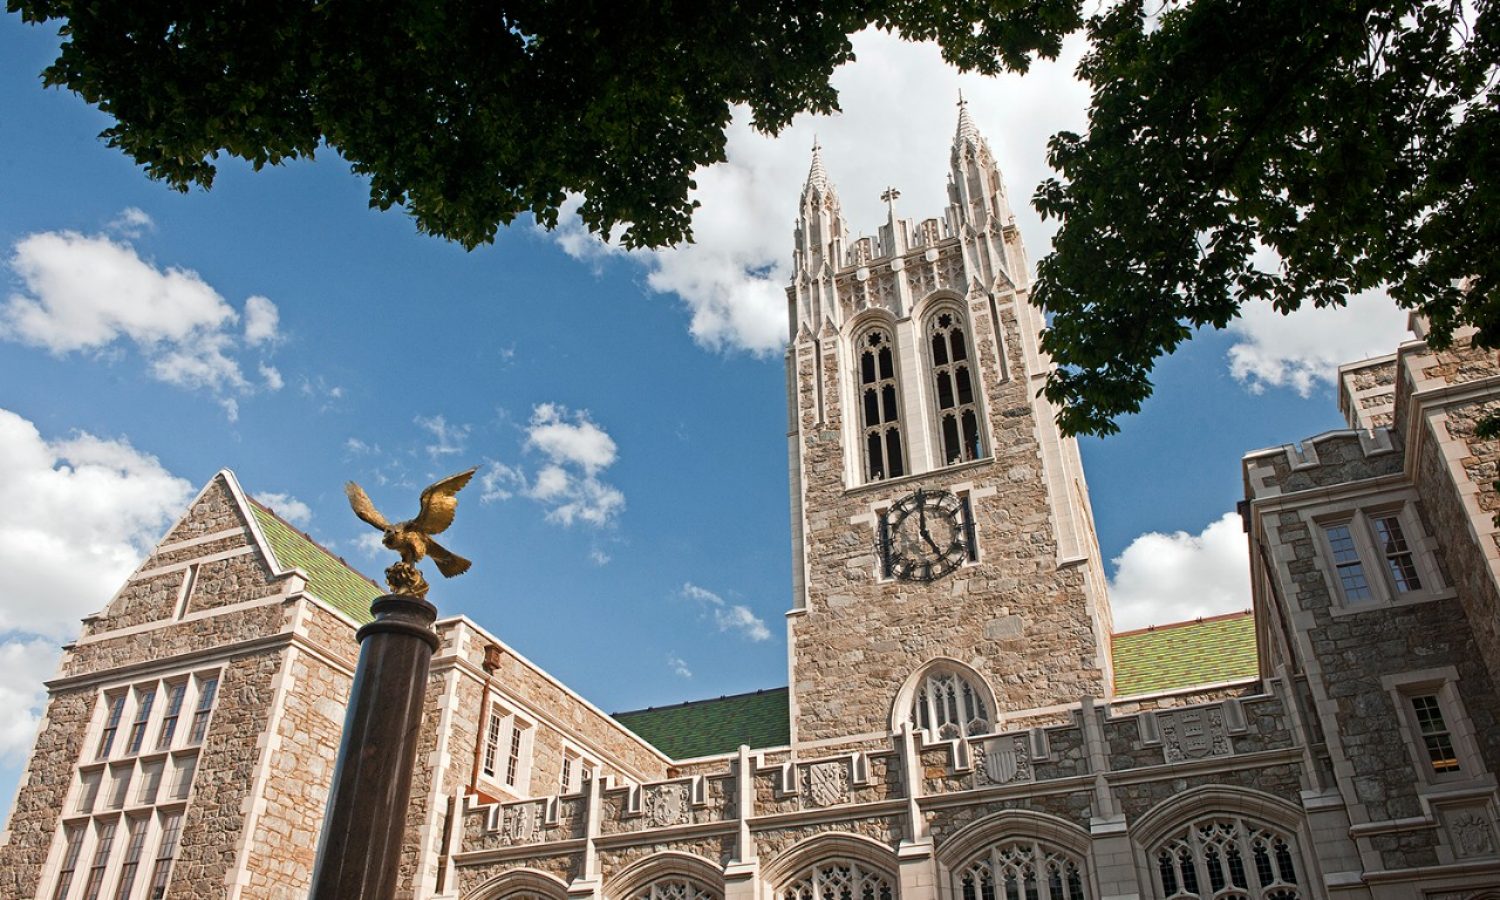 Gasson Hall with flowers